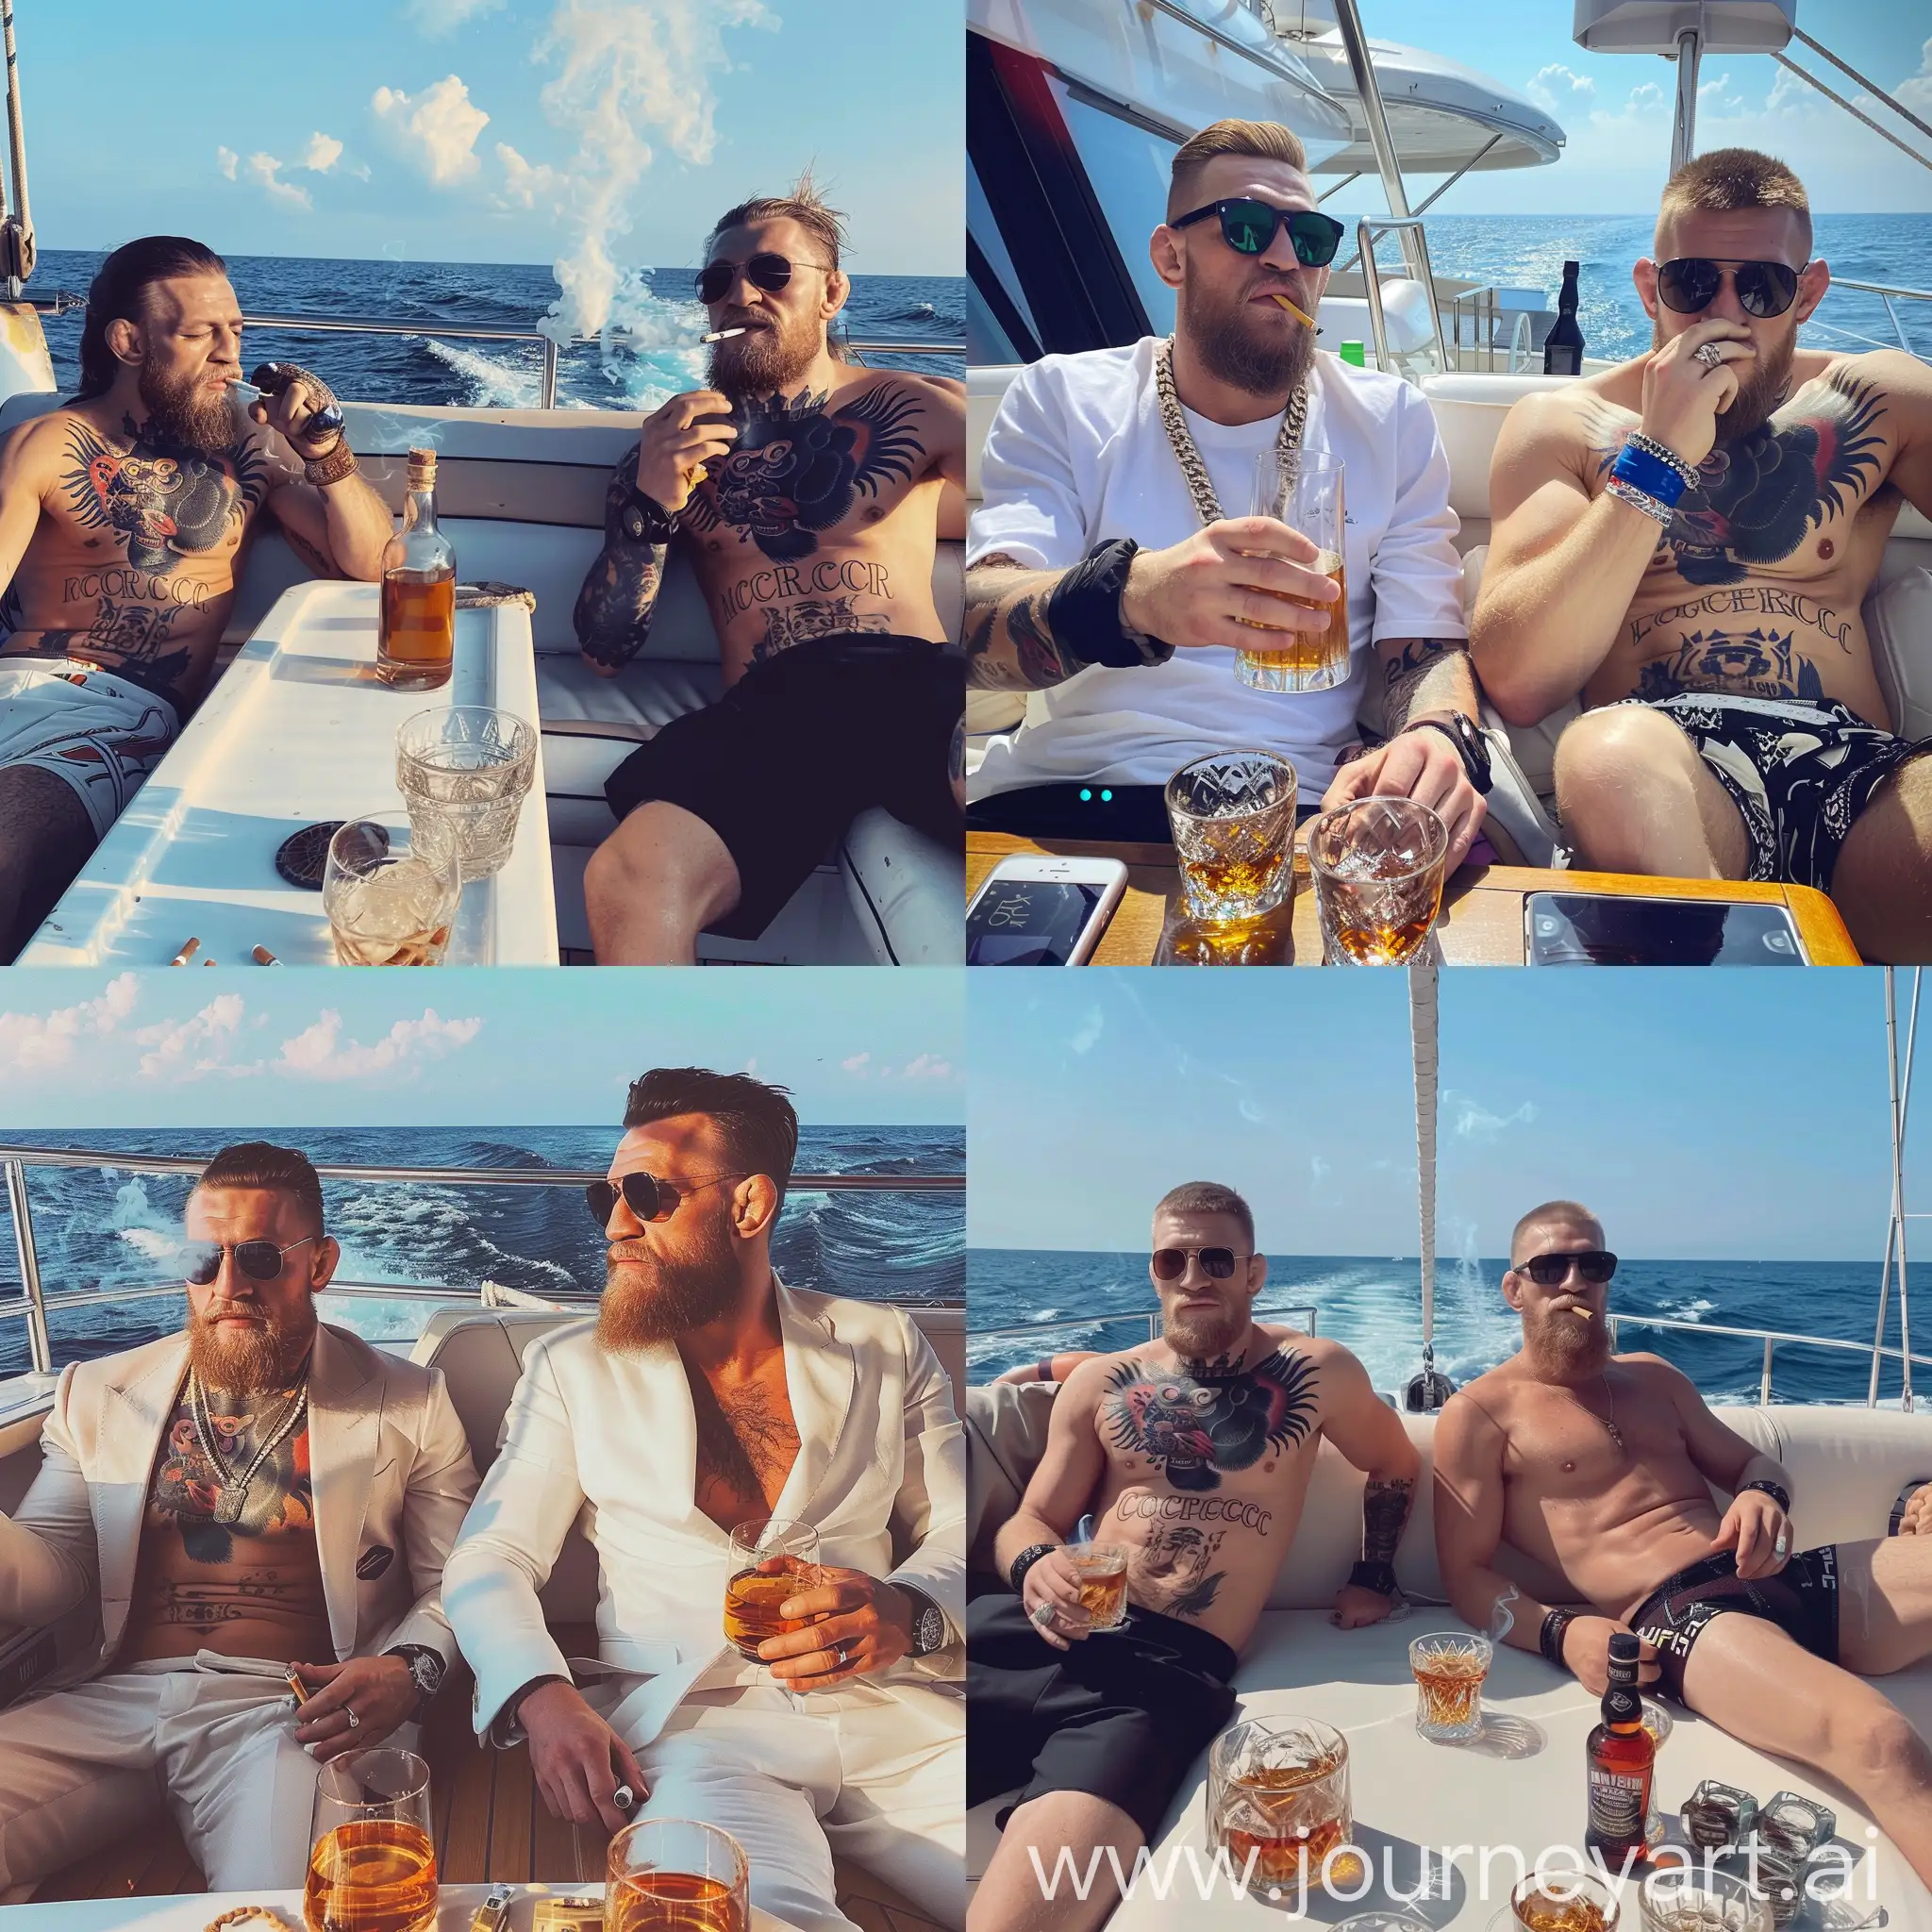 Conor-McGregor-Enjoying-Whiskey-with-Friend-on-Yacht-in-Crimea